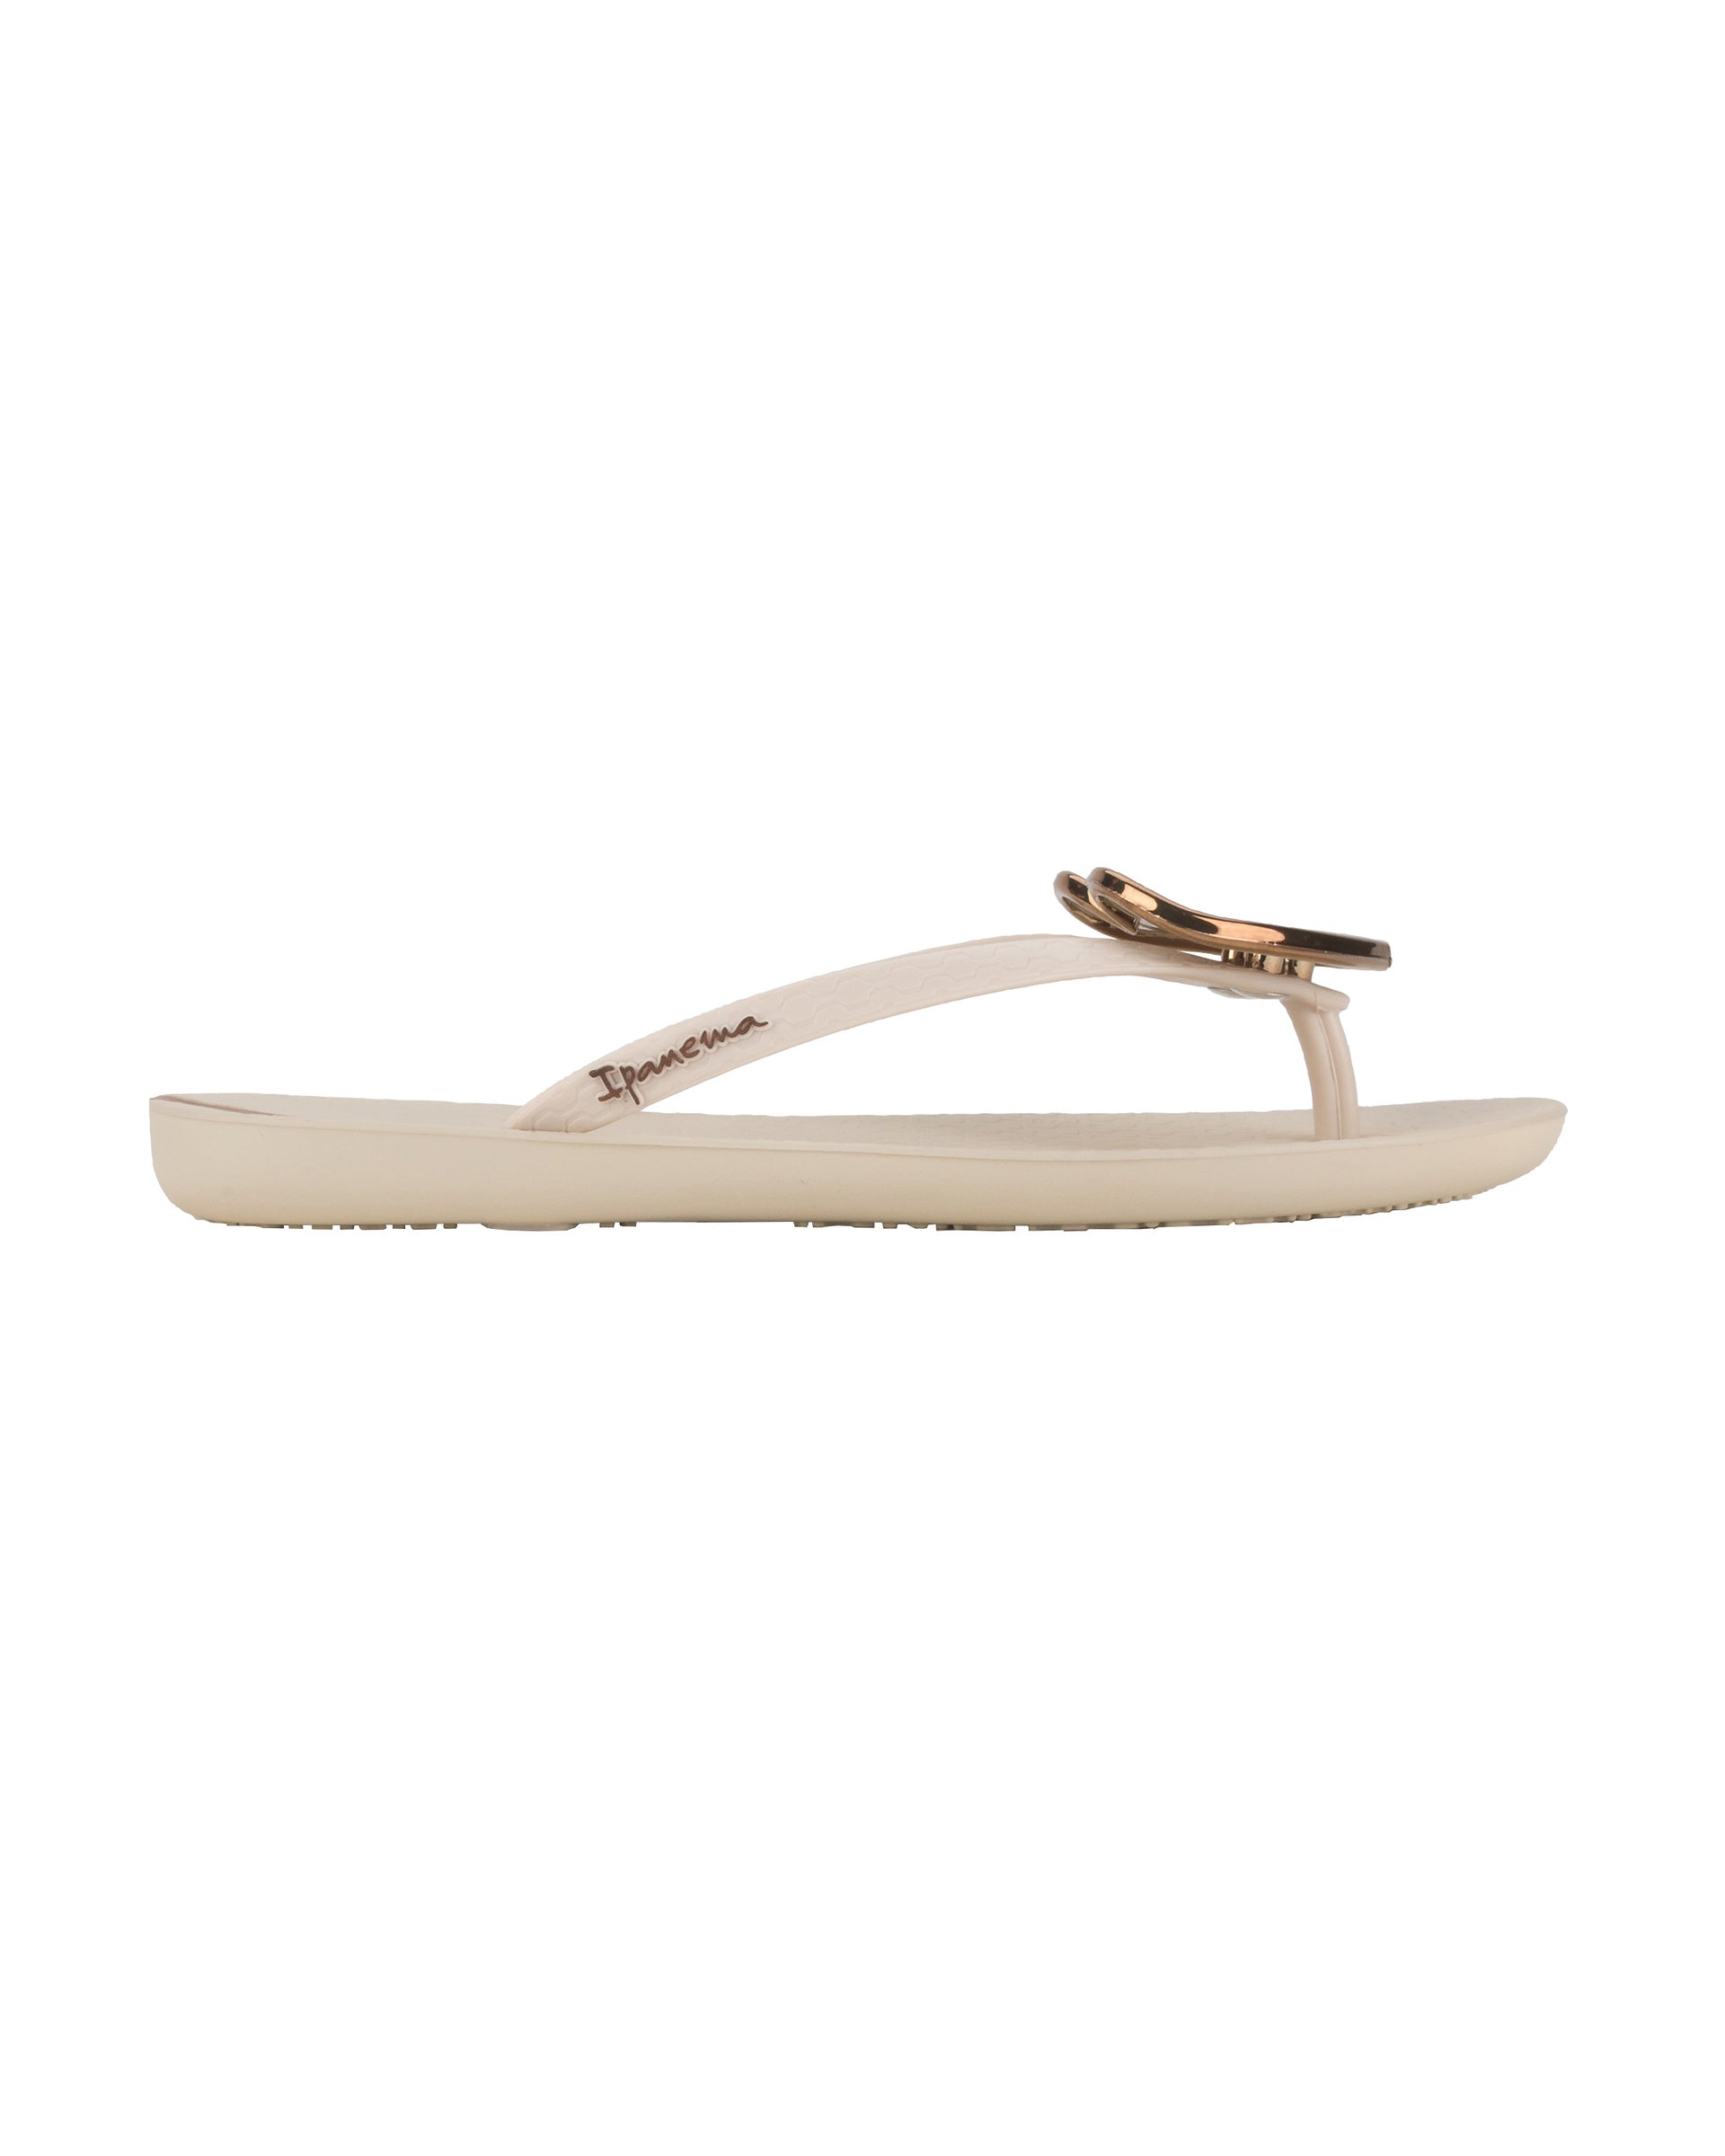 Outer side view of a beige Ipanema Wave Heart women's flip flop with bronze heart.